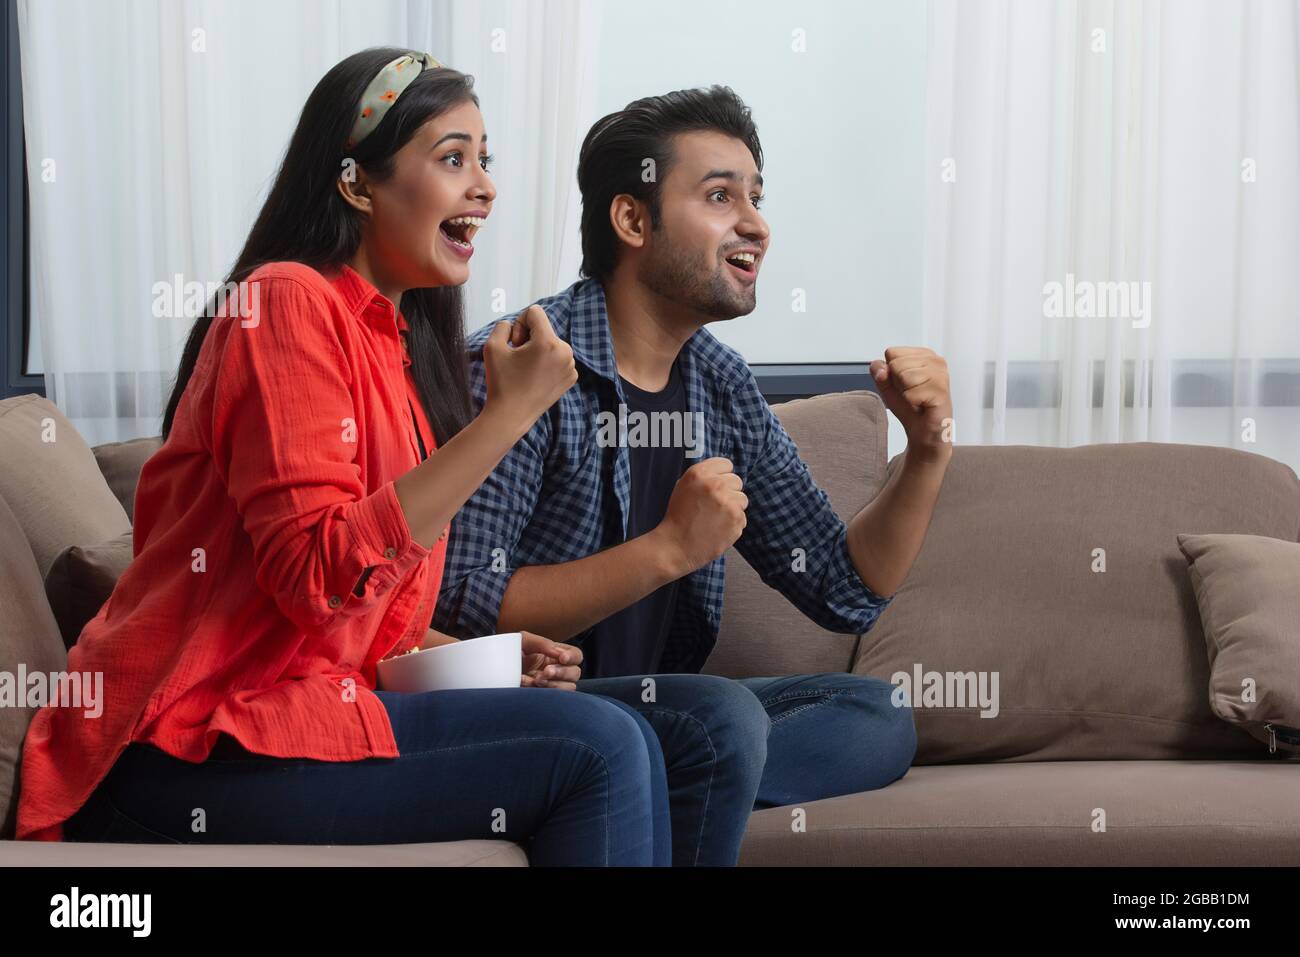 A young couple cheering for a team excitedly sitting in a room. Stock Photo